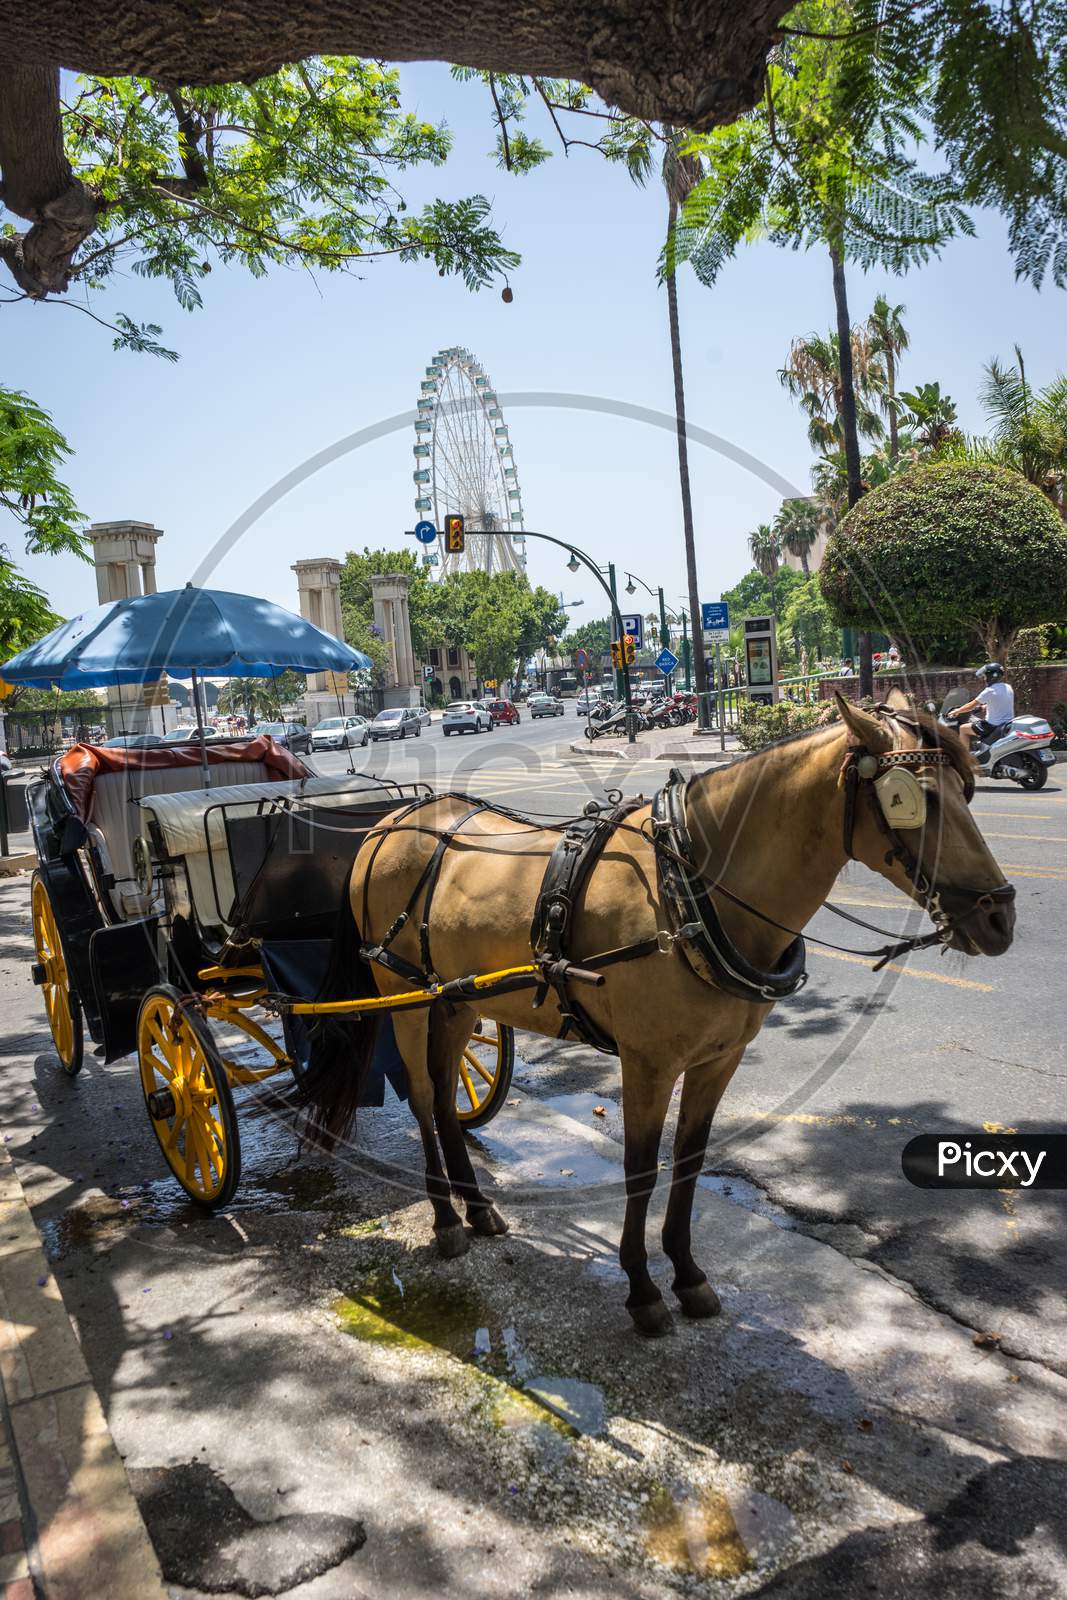 A Horse Drawn Carriage In Front Of A Giant Wheel At Malaga, Spain, Europe